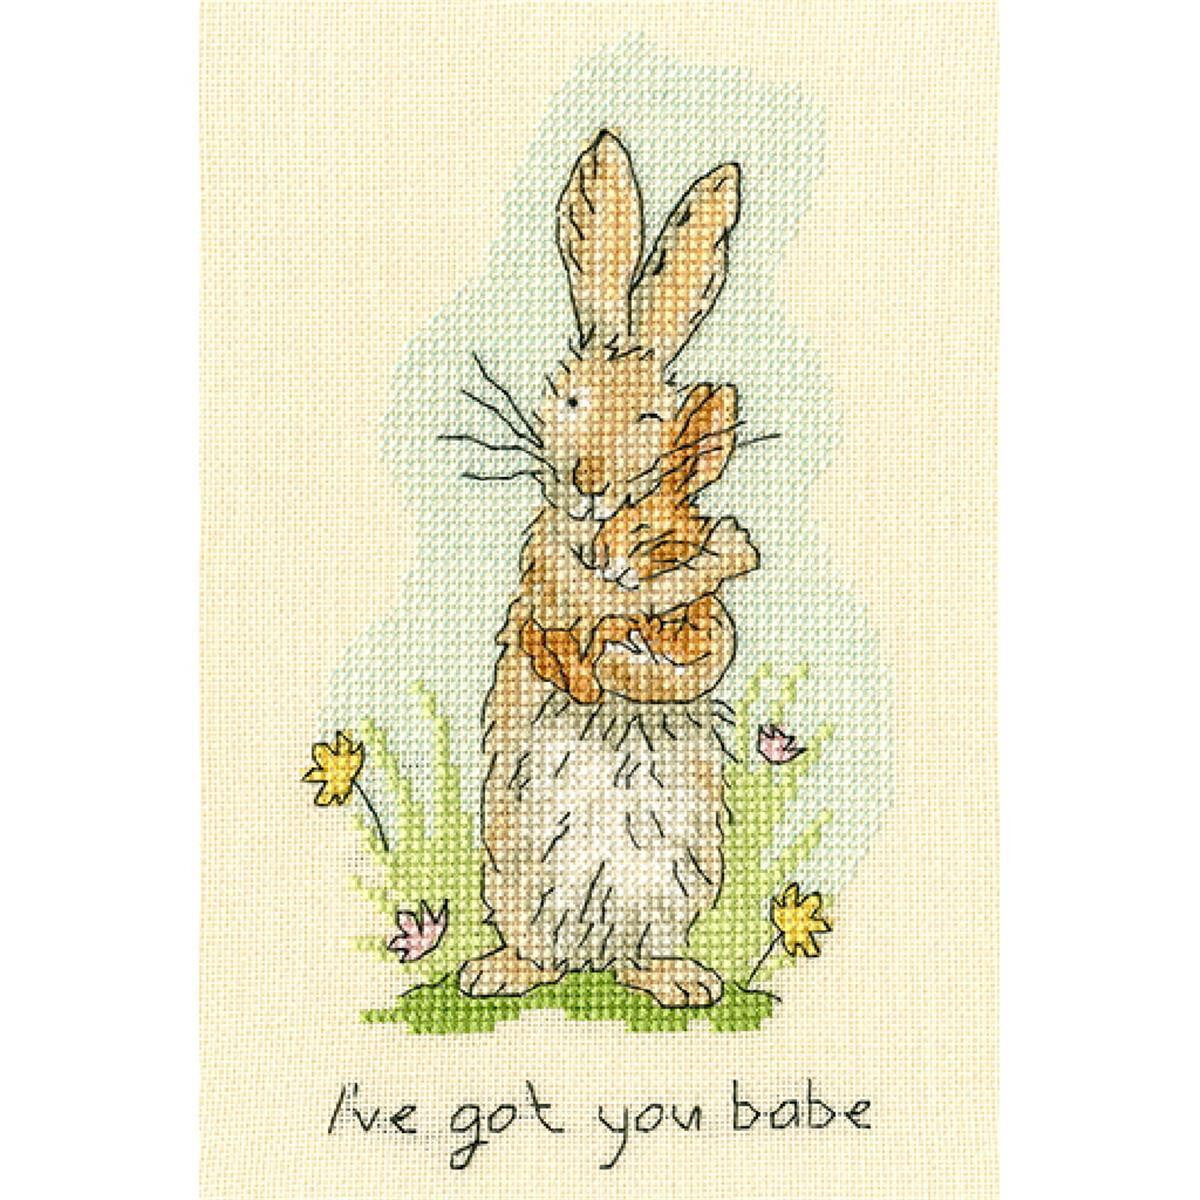 A hand-stitched embroidery of a brown rabbit hugging a...